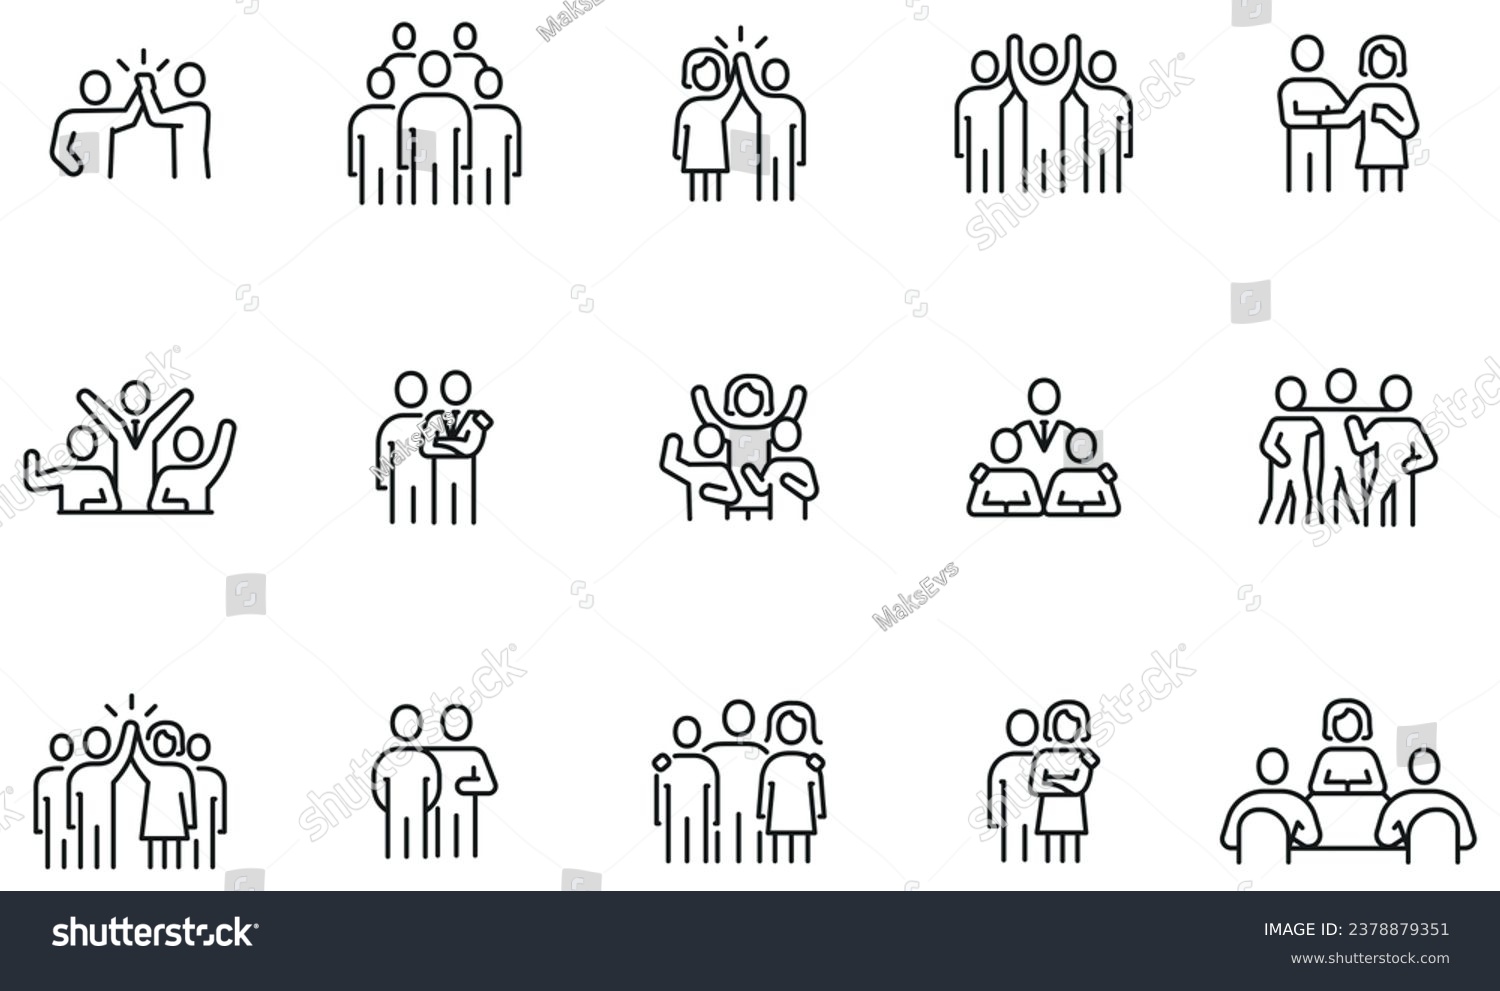 Vector Set of linear Icons Related to Harmony to Relationships, Interaction, Join Development and Equality. Mono Line Pictograms and Infographics Design Elements - part  4 #2378879351